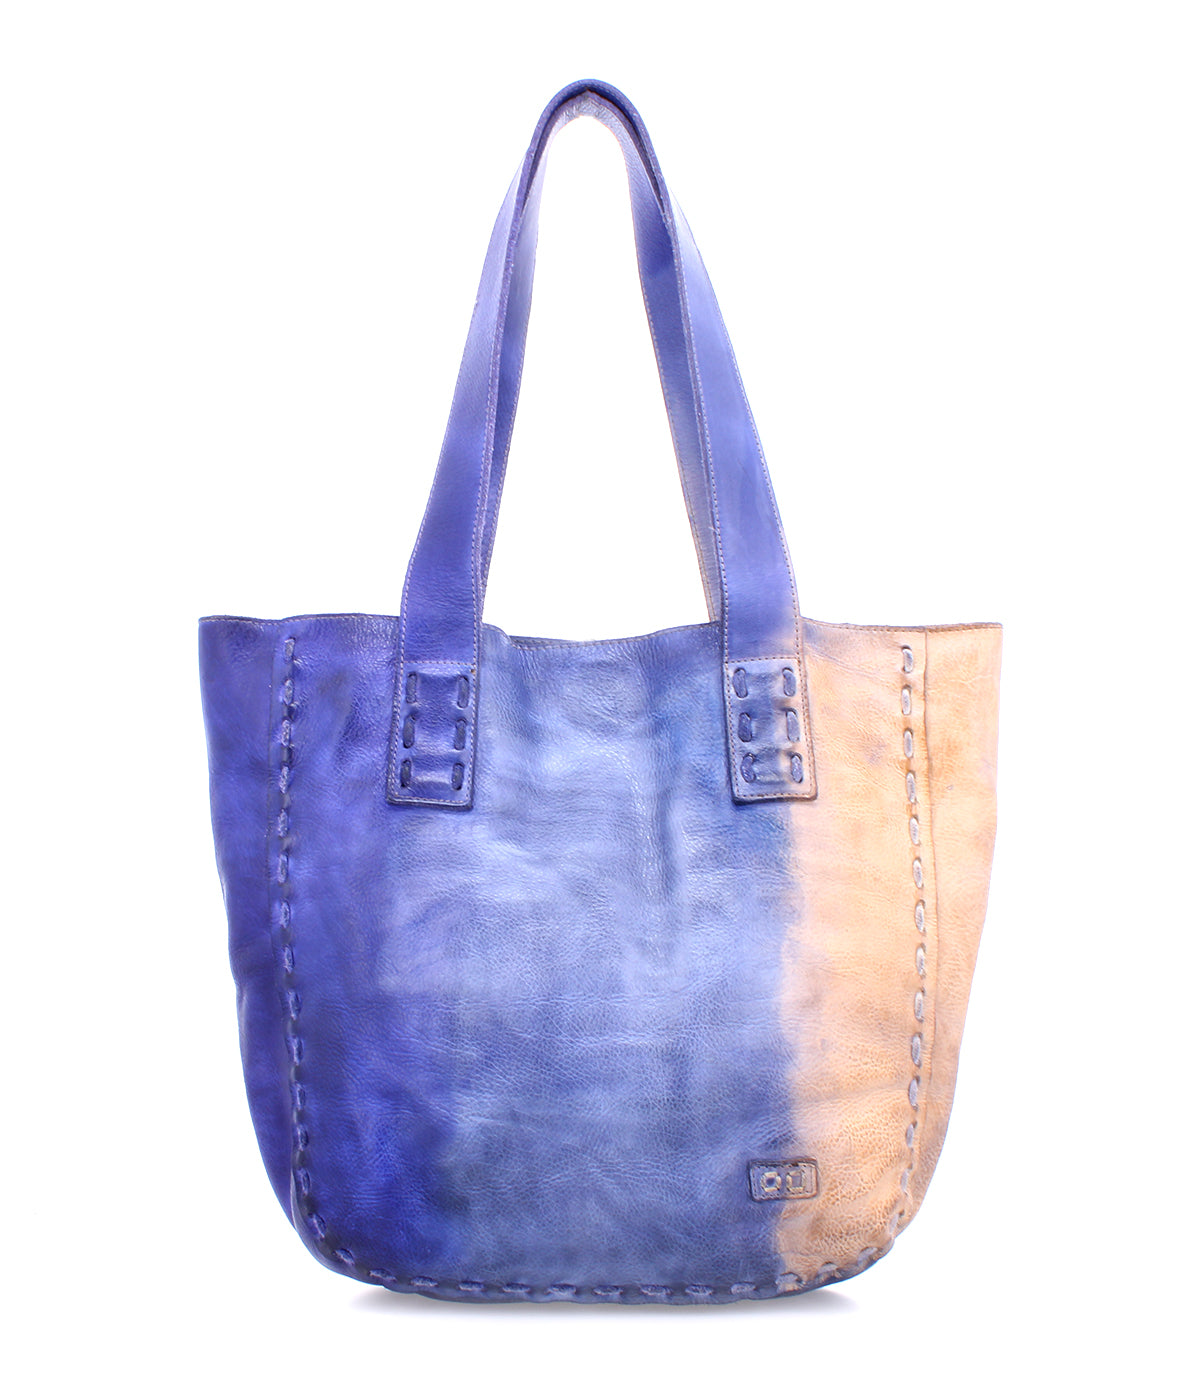 The Bed Stu Stevie tote bag showcases vintage-chic sophistication with its blue and tan leather, embodying the elegance of old-world craftsmanship.